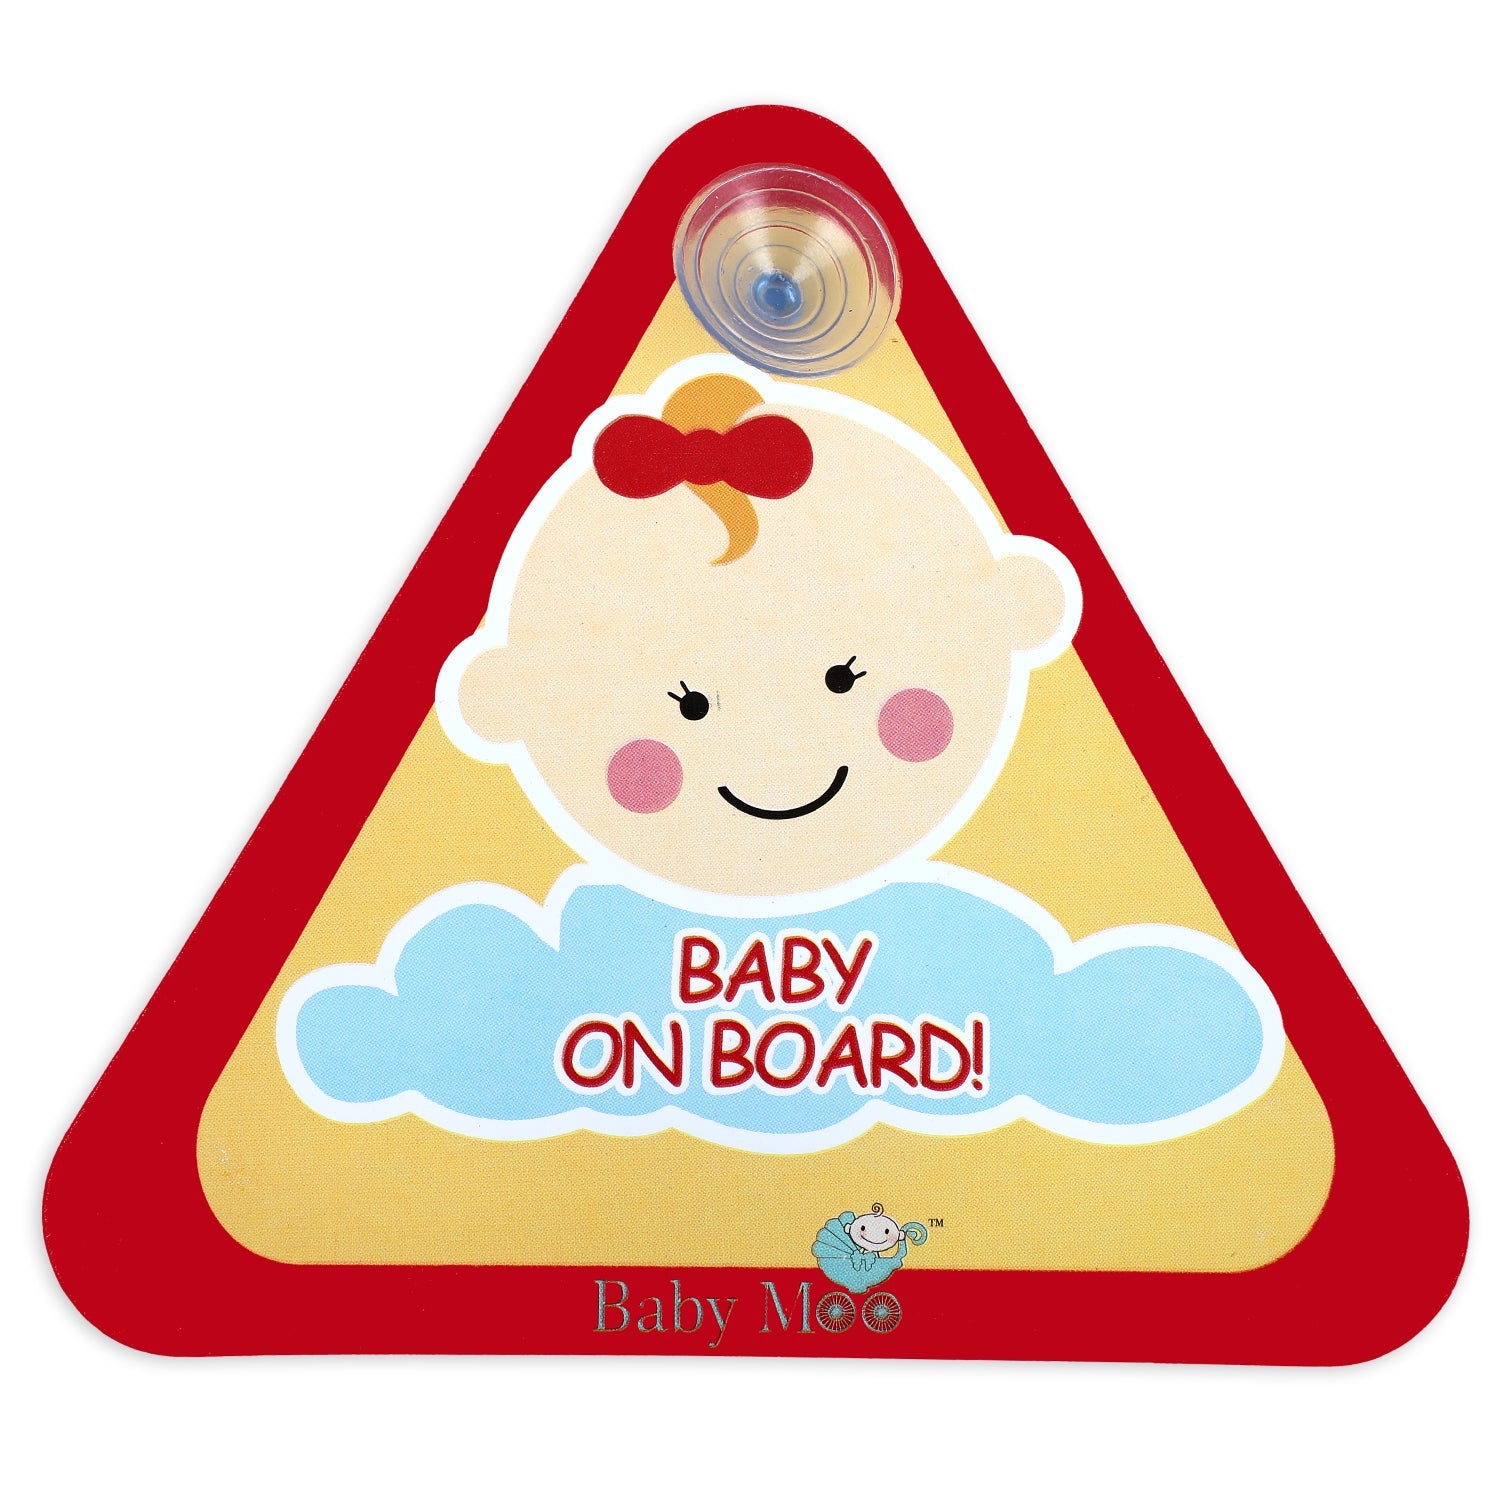 Baby Moo Triangular Baby On Board With Vacuum Suction Cup Clip - Red